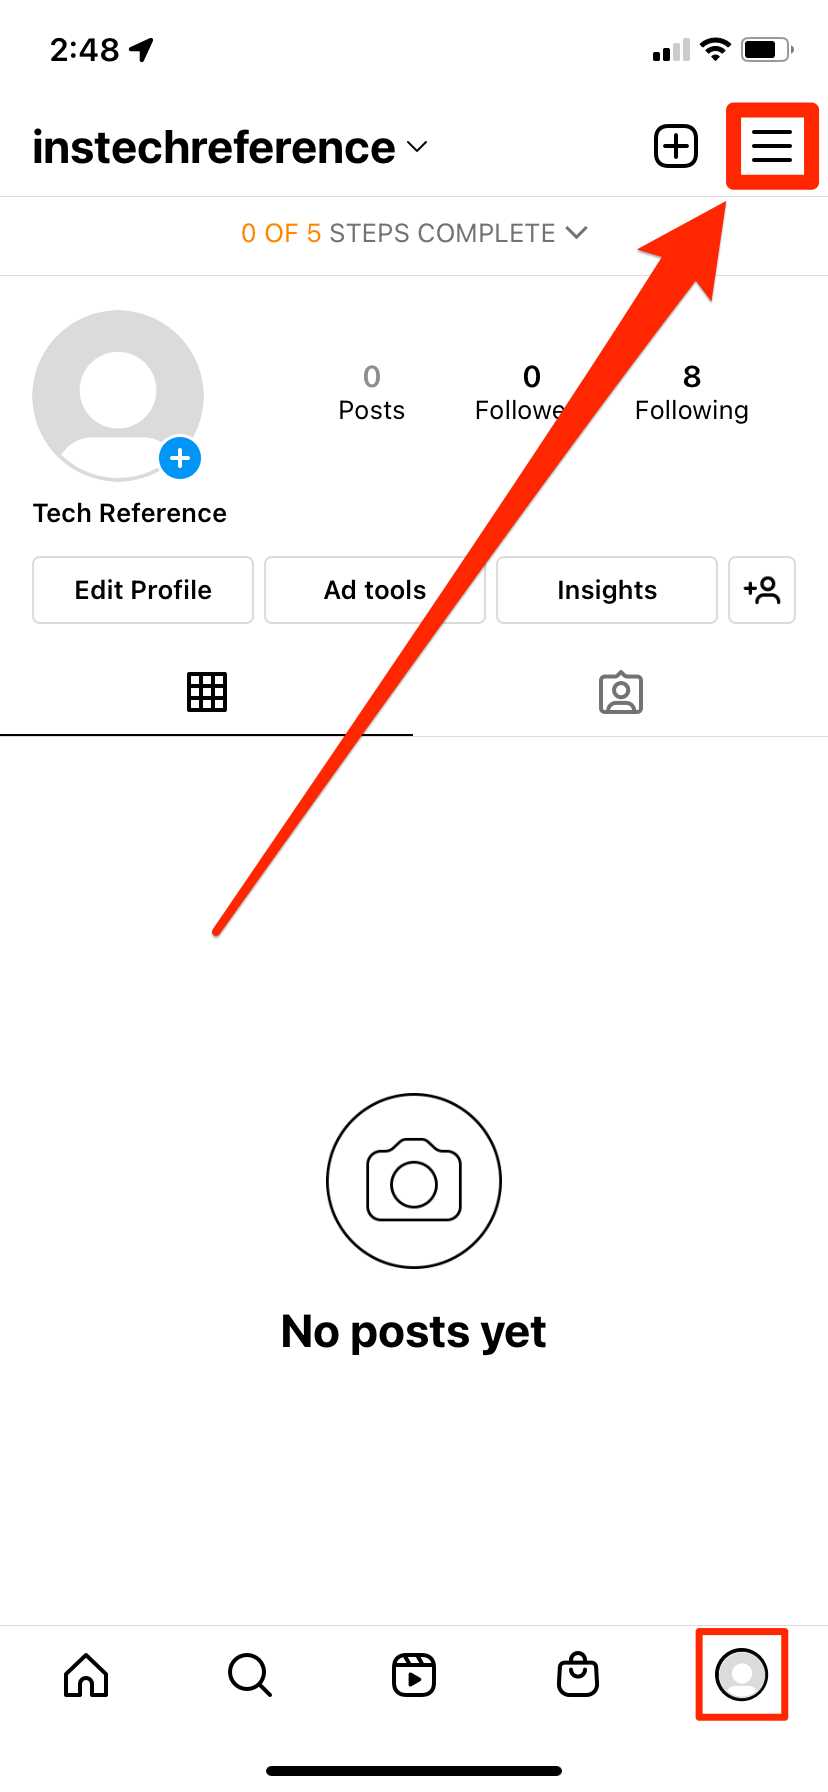 Step 1: Log in to Your Instagram Account